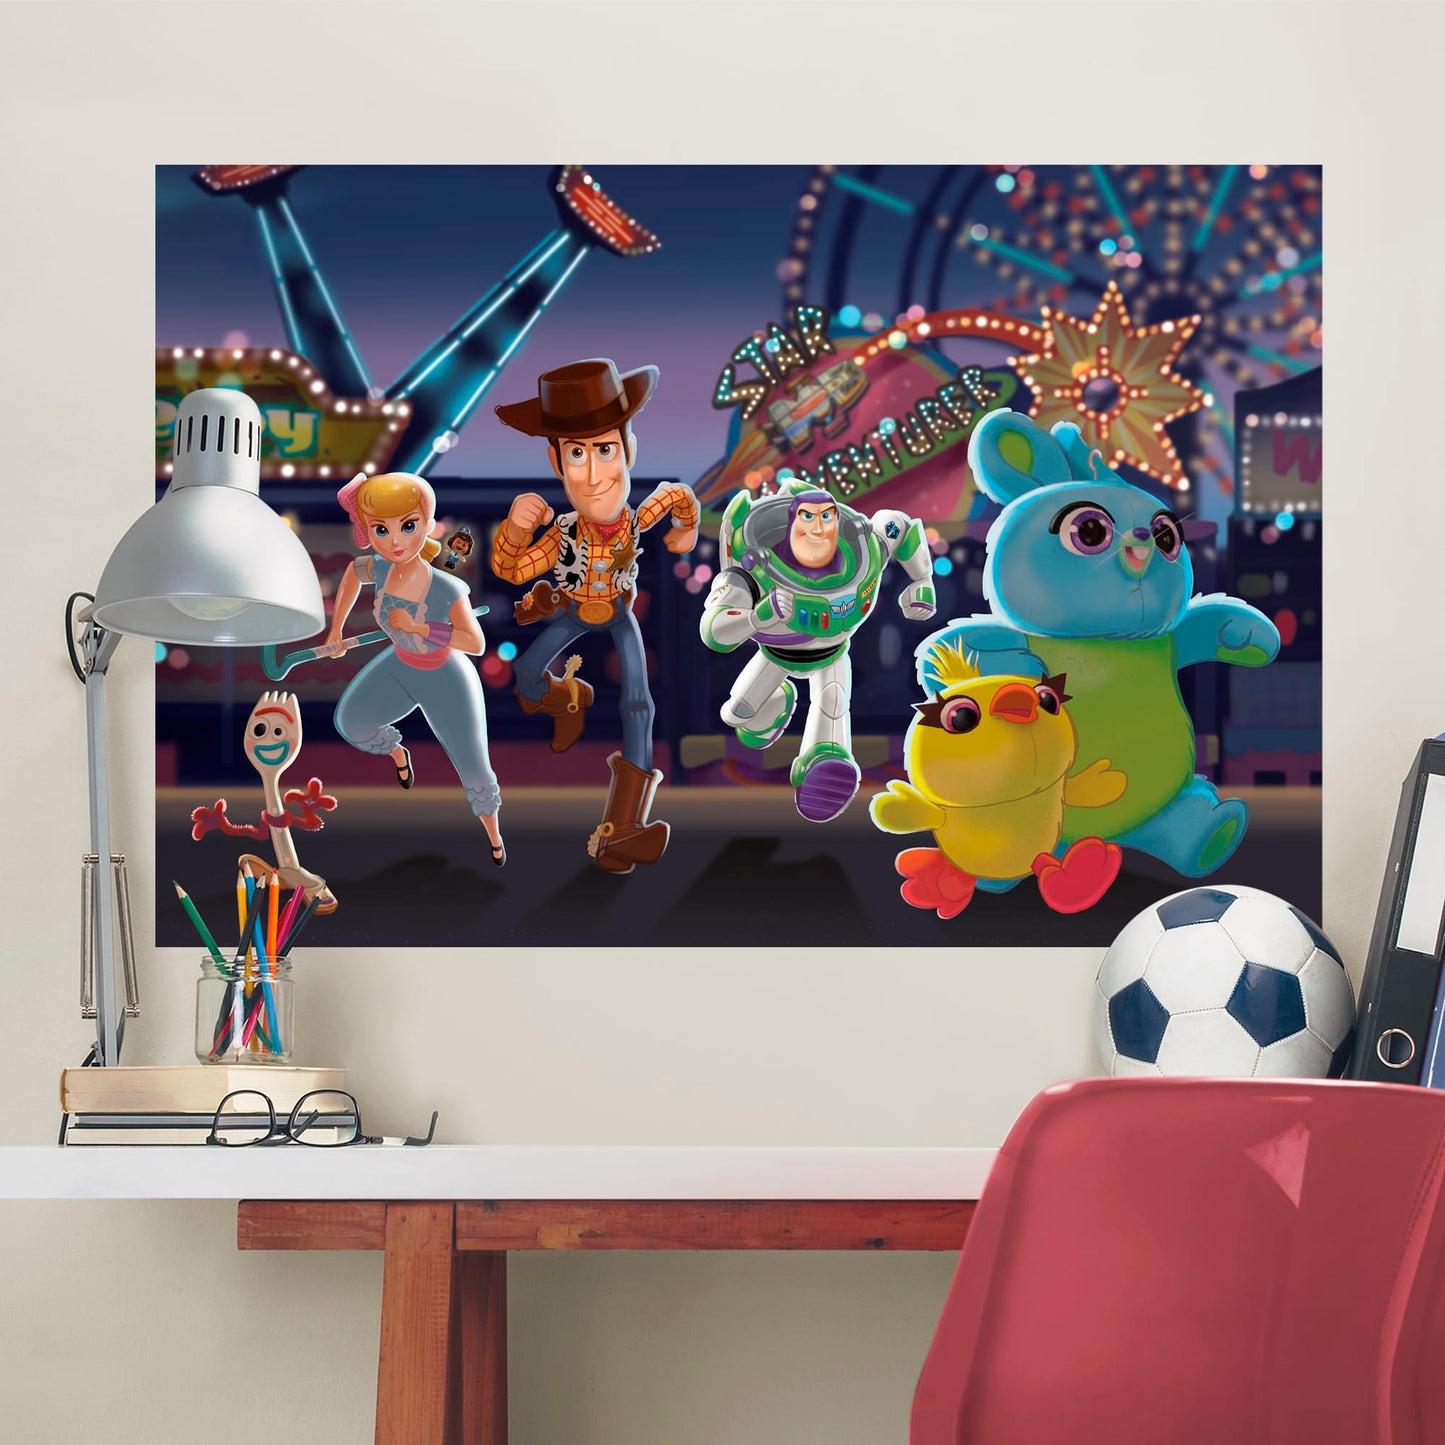 Toy Story 4:  Movie Poster Mural        - Officially Licensed Disney Removable Wall   Adhesive Decal